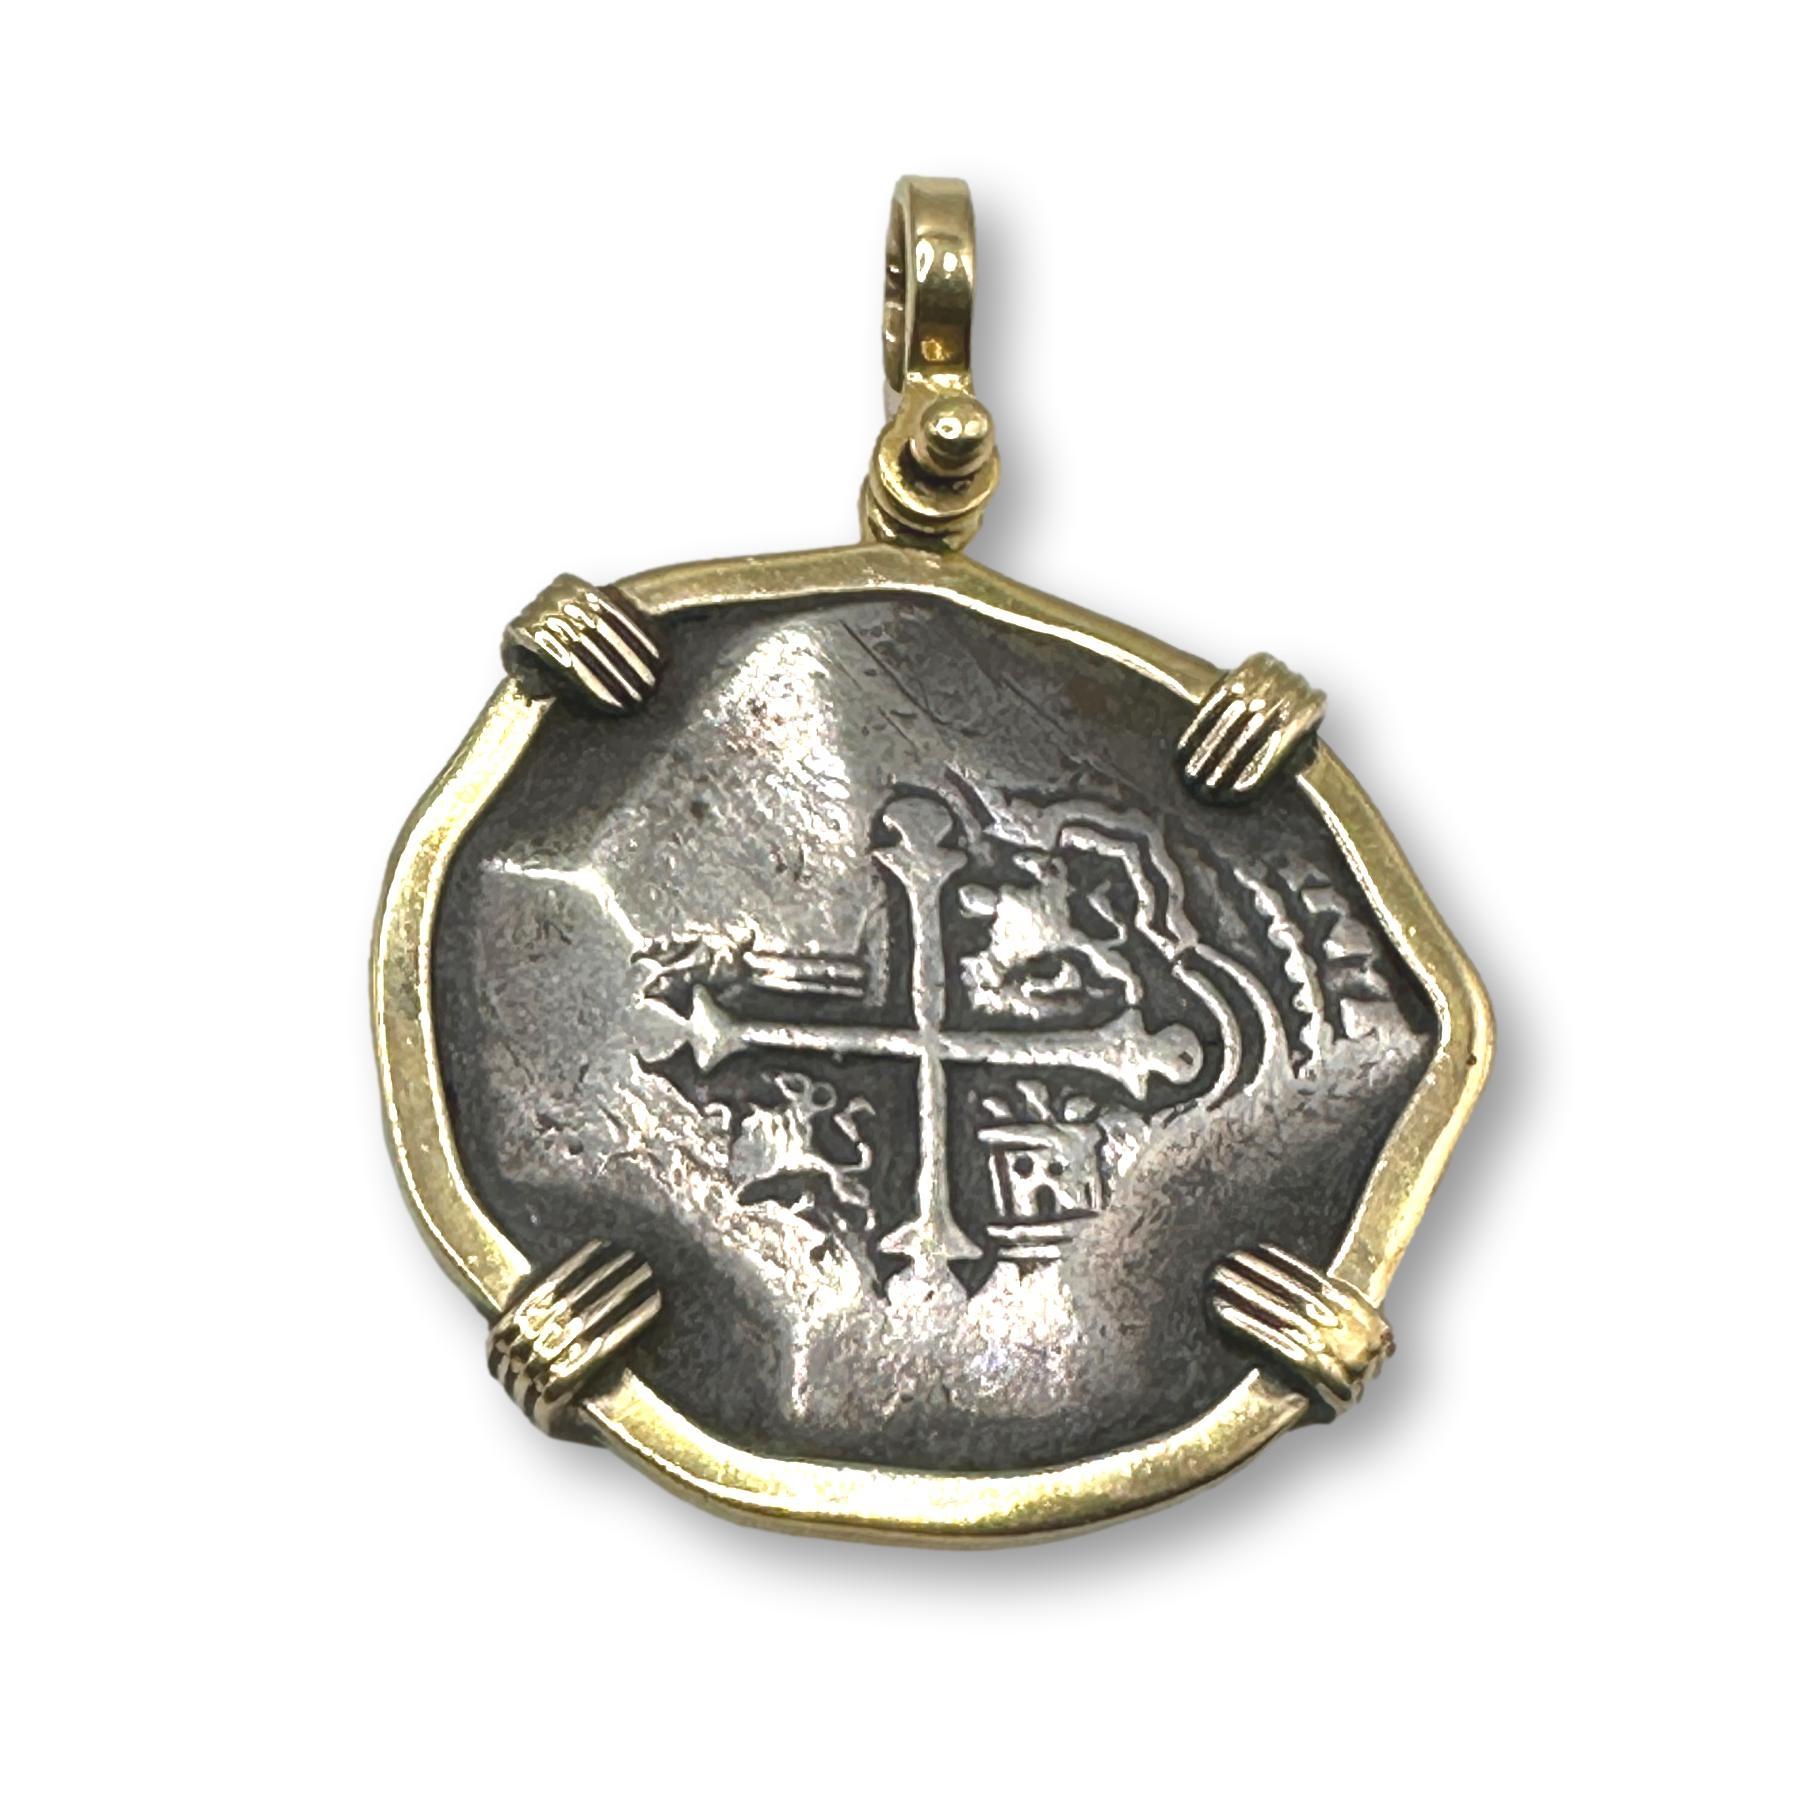 Spanish Shipwreck Coin Mounted in 14K Gold Pendant